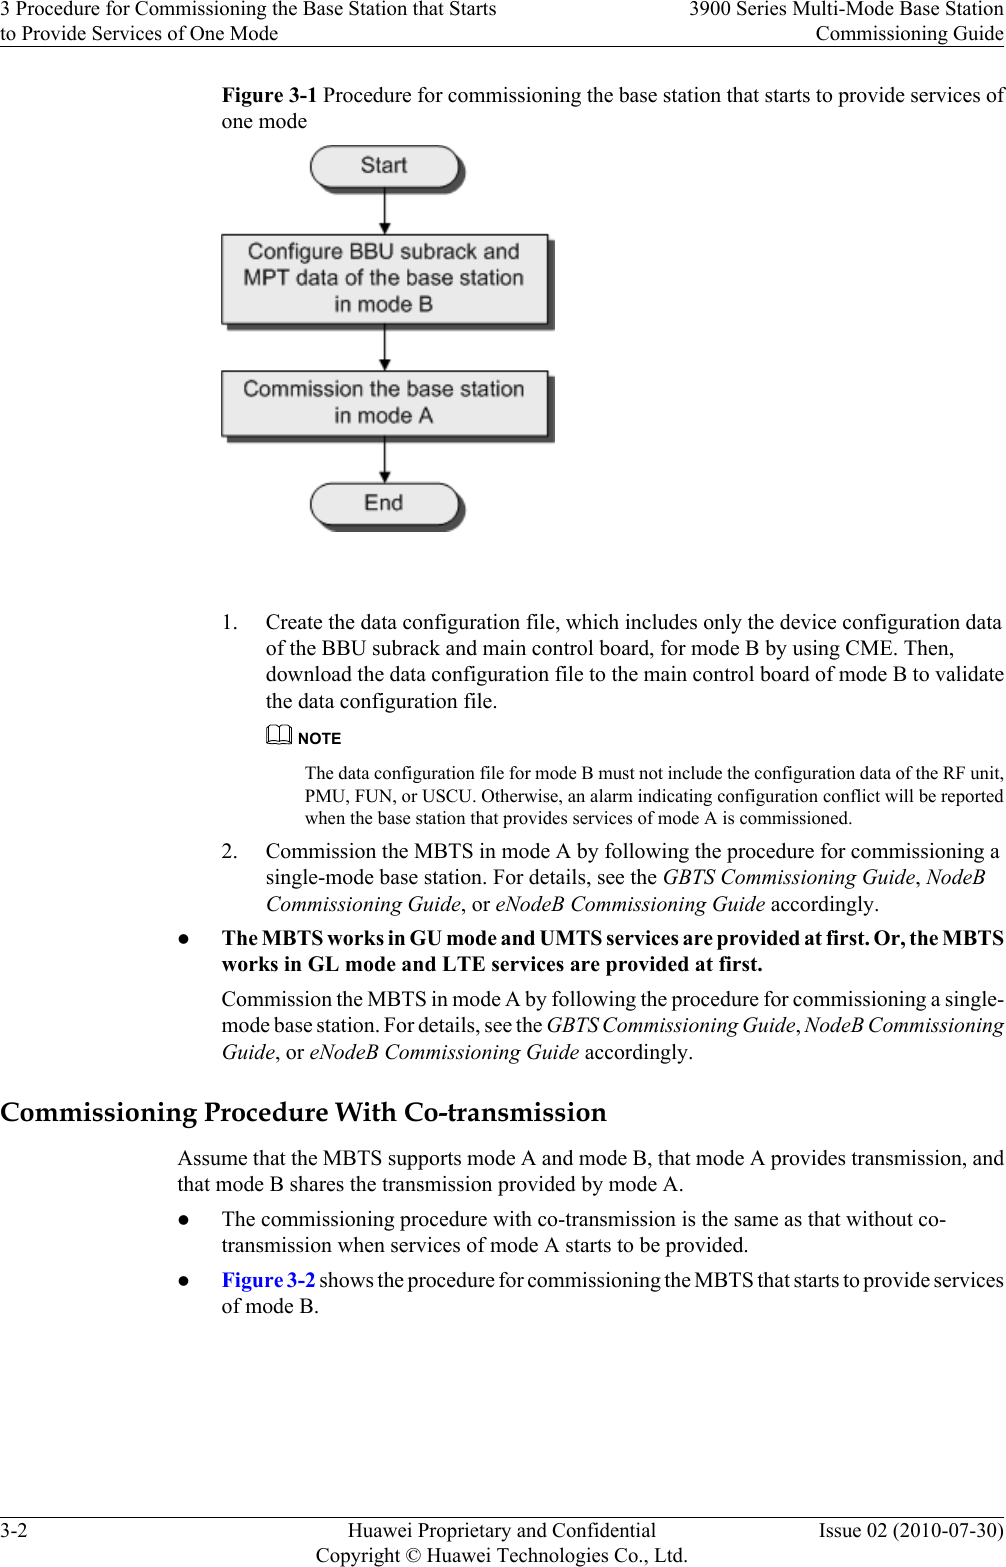 Figure 3-1 Procedure for commissioning the base station that starts to provide services ofone mode 1. Create the data configuration file, which includes only the device configuration dataof the BBU subrack and main control board, for mode B by using CME. Then,download the data configuration file to the main control board of mode B to validatethe data configuration file.NOTEThe data configuration file for mode B must not include the configuration data of the RF unit,PMU, FUN, or USCU. Otherwise, an alarm indicating configuration conflict will be reportedwhen the base station that provides services of mode A is commissioned.2. Commission the MBTS in mode A by following the procedure for commissioning asingle-mode base station. For details, see the GBTS Commissioning Guide, NodeBCommissioning Guide, or eNodeB Commissioning Guide accordingly.lThe MBTS works in GU mode and UMTS services are provided at first. Or, the MBTSworks in GL mode and LTE services are provided at first.Commission the MBTS in mode A by following the procedure for commissioning a single-mode base station. For details, see the GBTS Commissioning Guide, NodeB CommissioningGuide, or eNodeB Commissioning Guide accordingly.Commissioning Procedure With Co-transmissionAssume that the MBTS supports mode A and mode B, that mode A provides transmission, andthat mode B shares the transmission provided by mode A.lThe commissioning procedure with co-transmission is the same as that without co-transmission when services of mode A starts to be provided.lFigure 3-2 shows the procedure for commissioning the MBTS that starts to provide servicesof mode B.3 Procedure for Commissioning the Base Station that Startsto Provide Services of One Mode3900 Series Multi-Mode Base StationCommissioning Guide3-2 Huawei Proprietary and ConfidentialCopyright © Huawei Technologies Co., Ltd.Issue 02 (2010-07-30)